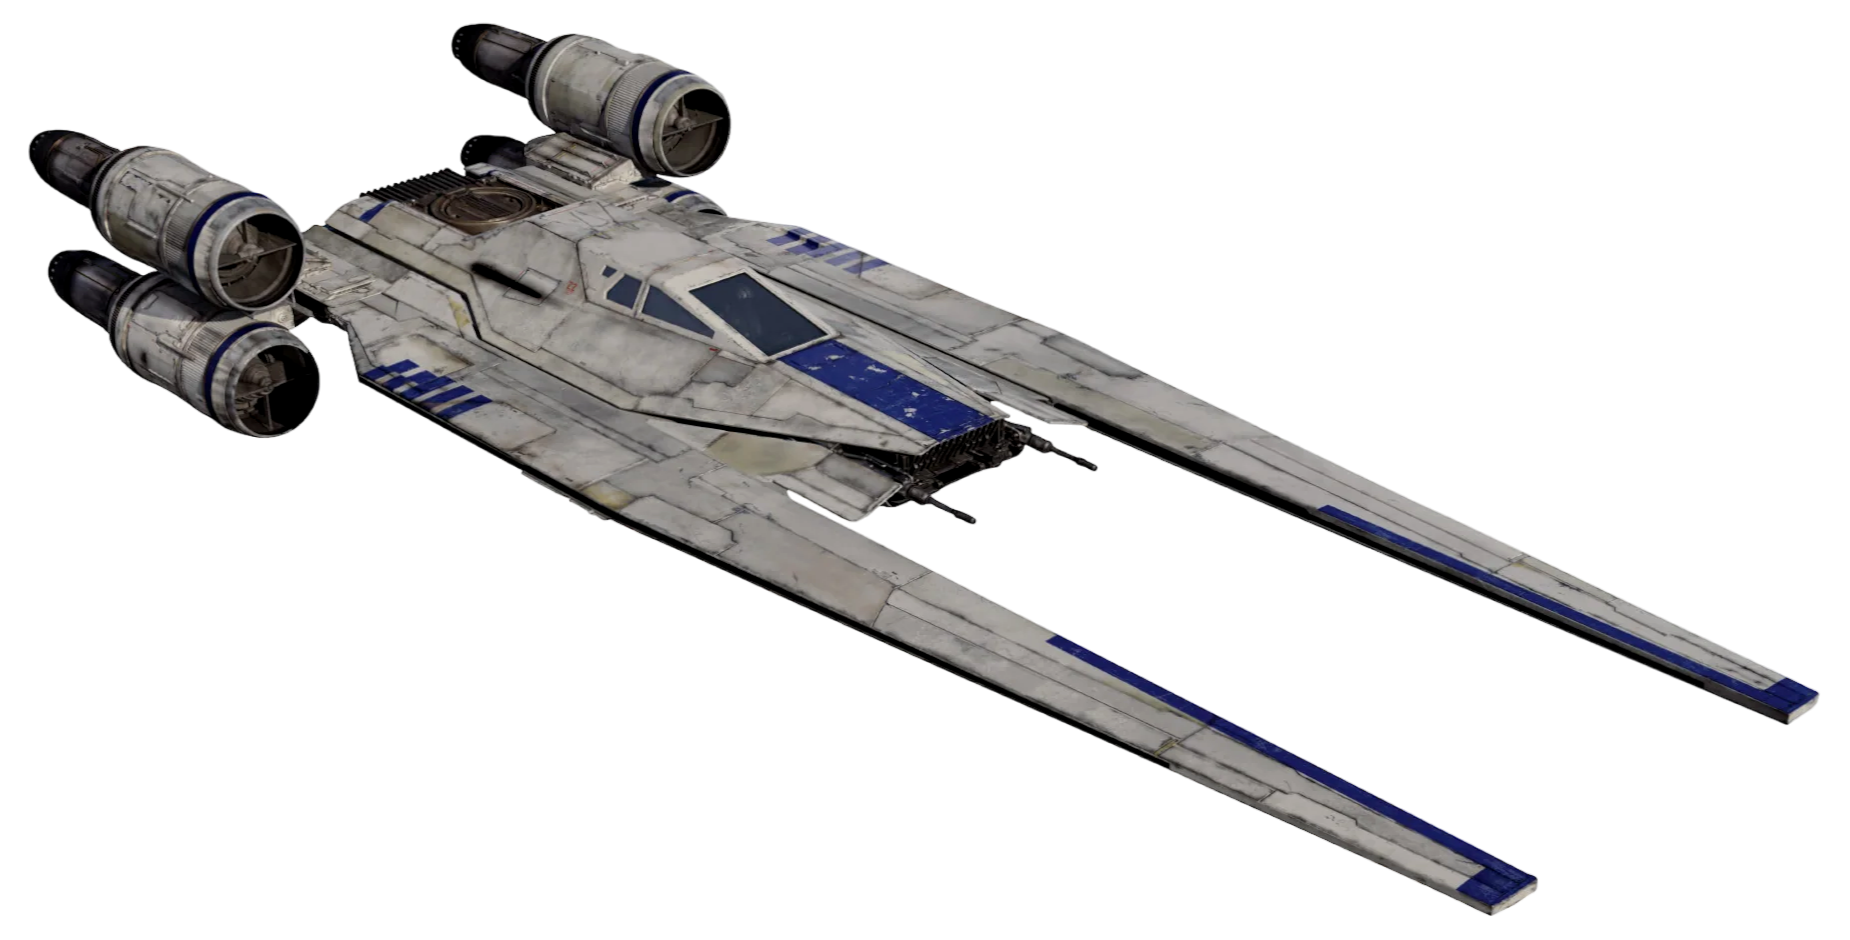 What is a U-wing in Star Wars?